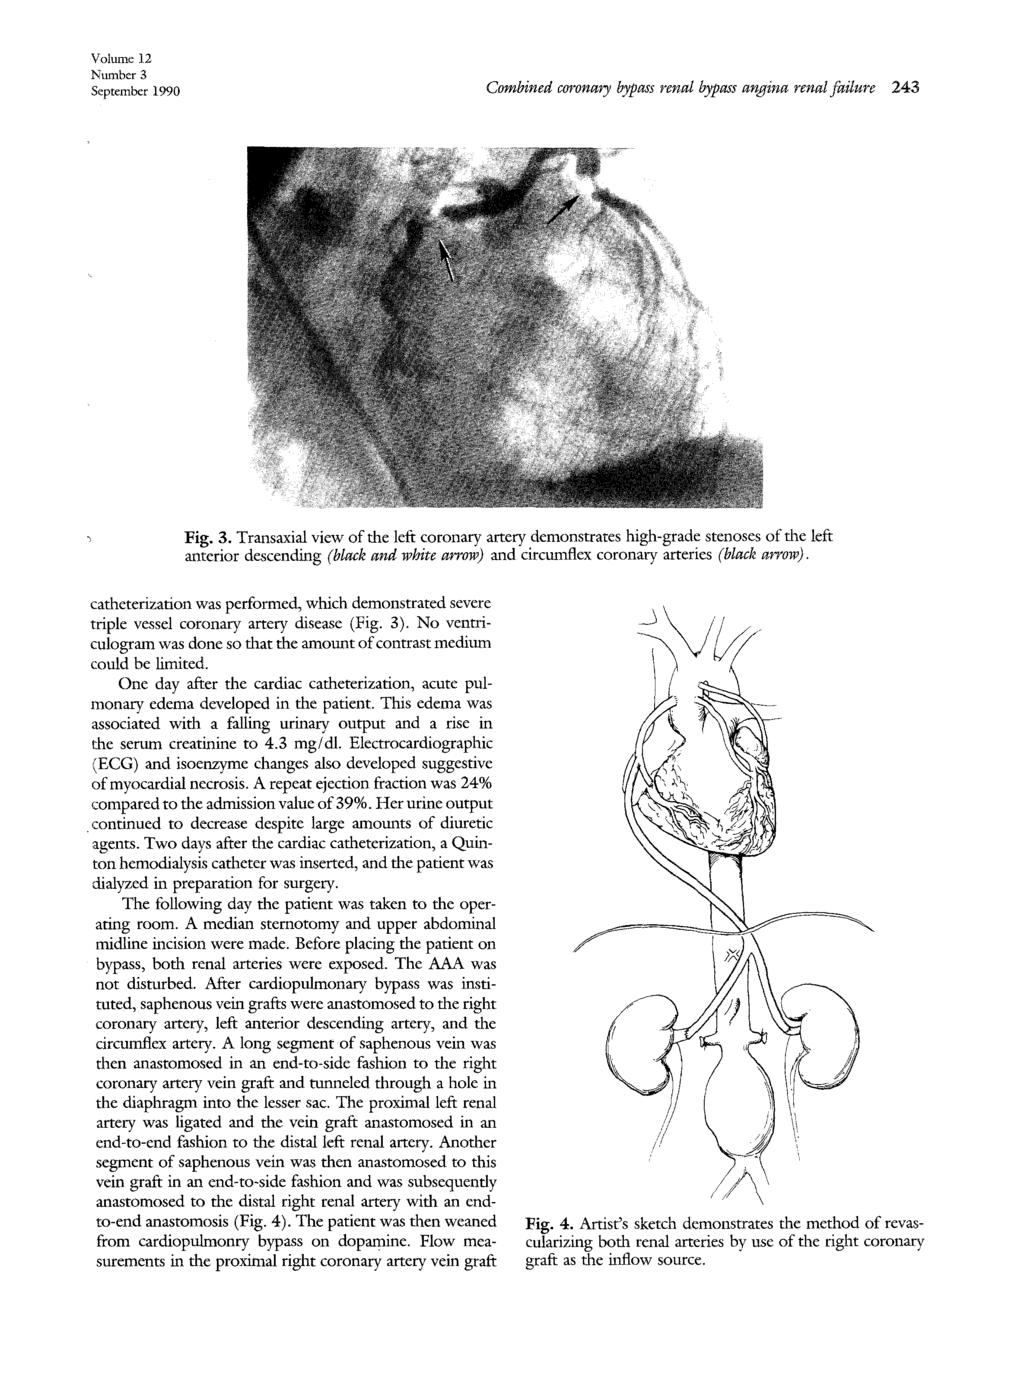 Volume 12 Number 3 September 1990 Combined coronary bypass renal bypass angina renal failure 243 Fig. 3. Transaxial view of the left coronary artery demonstrates high-grade stenoses of the left anterior descending (black and wbi~e arrow) and circumflex coronary arteries (black arrow).